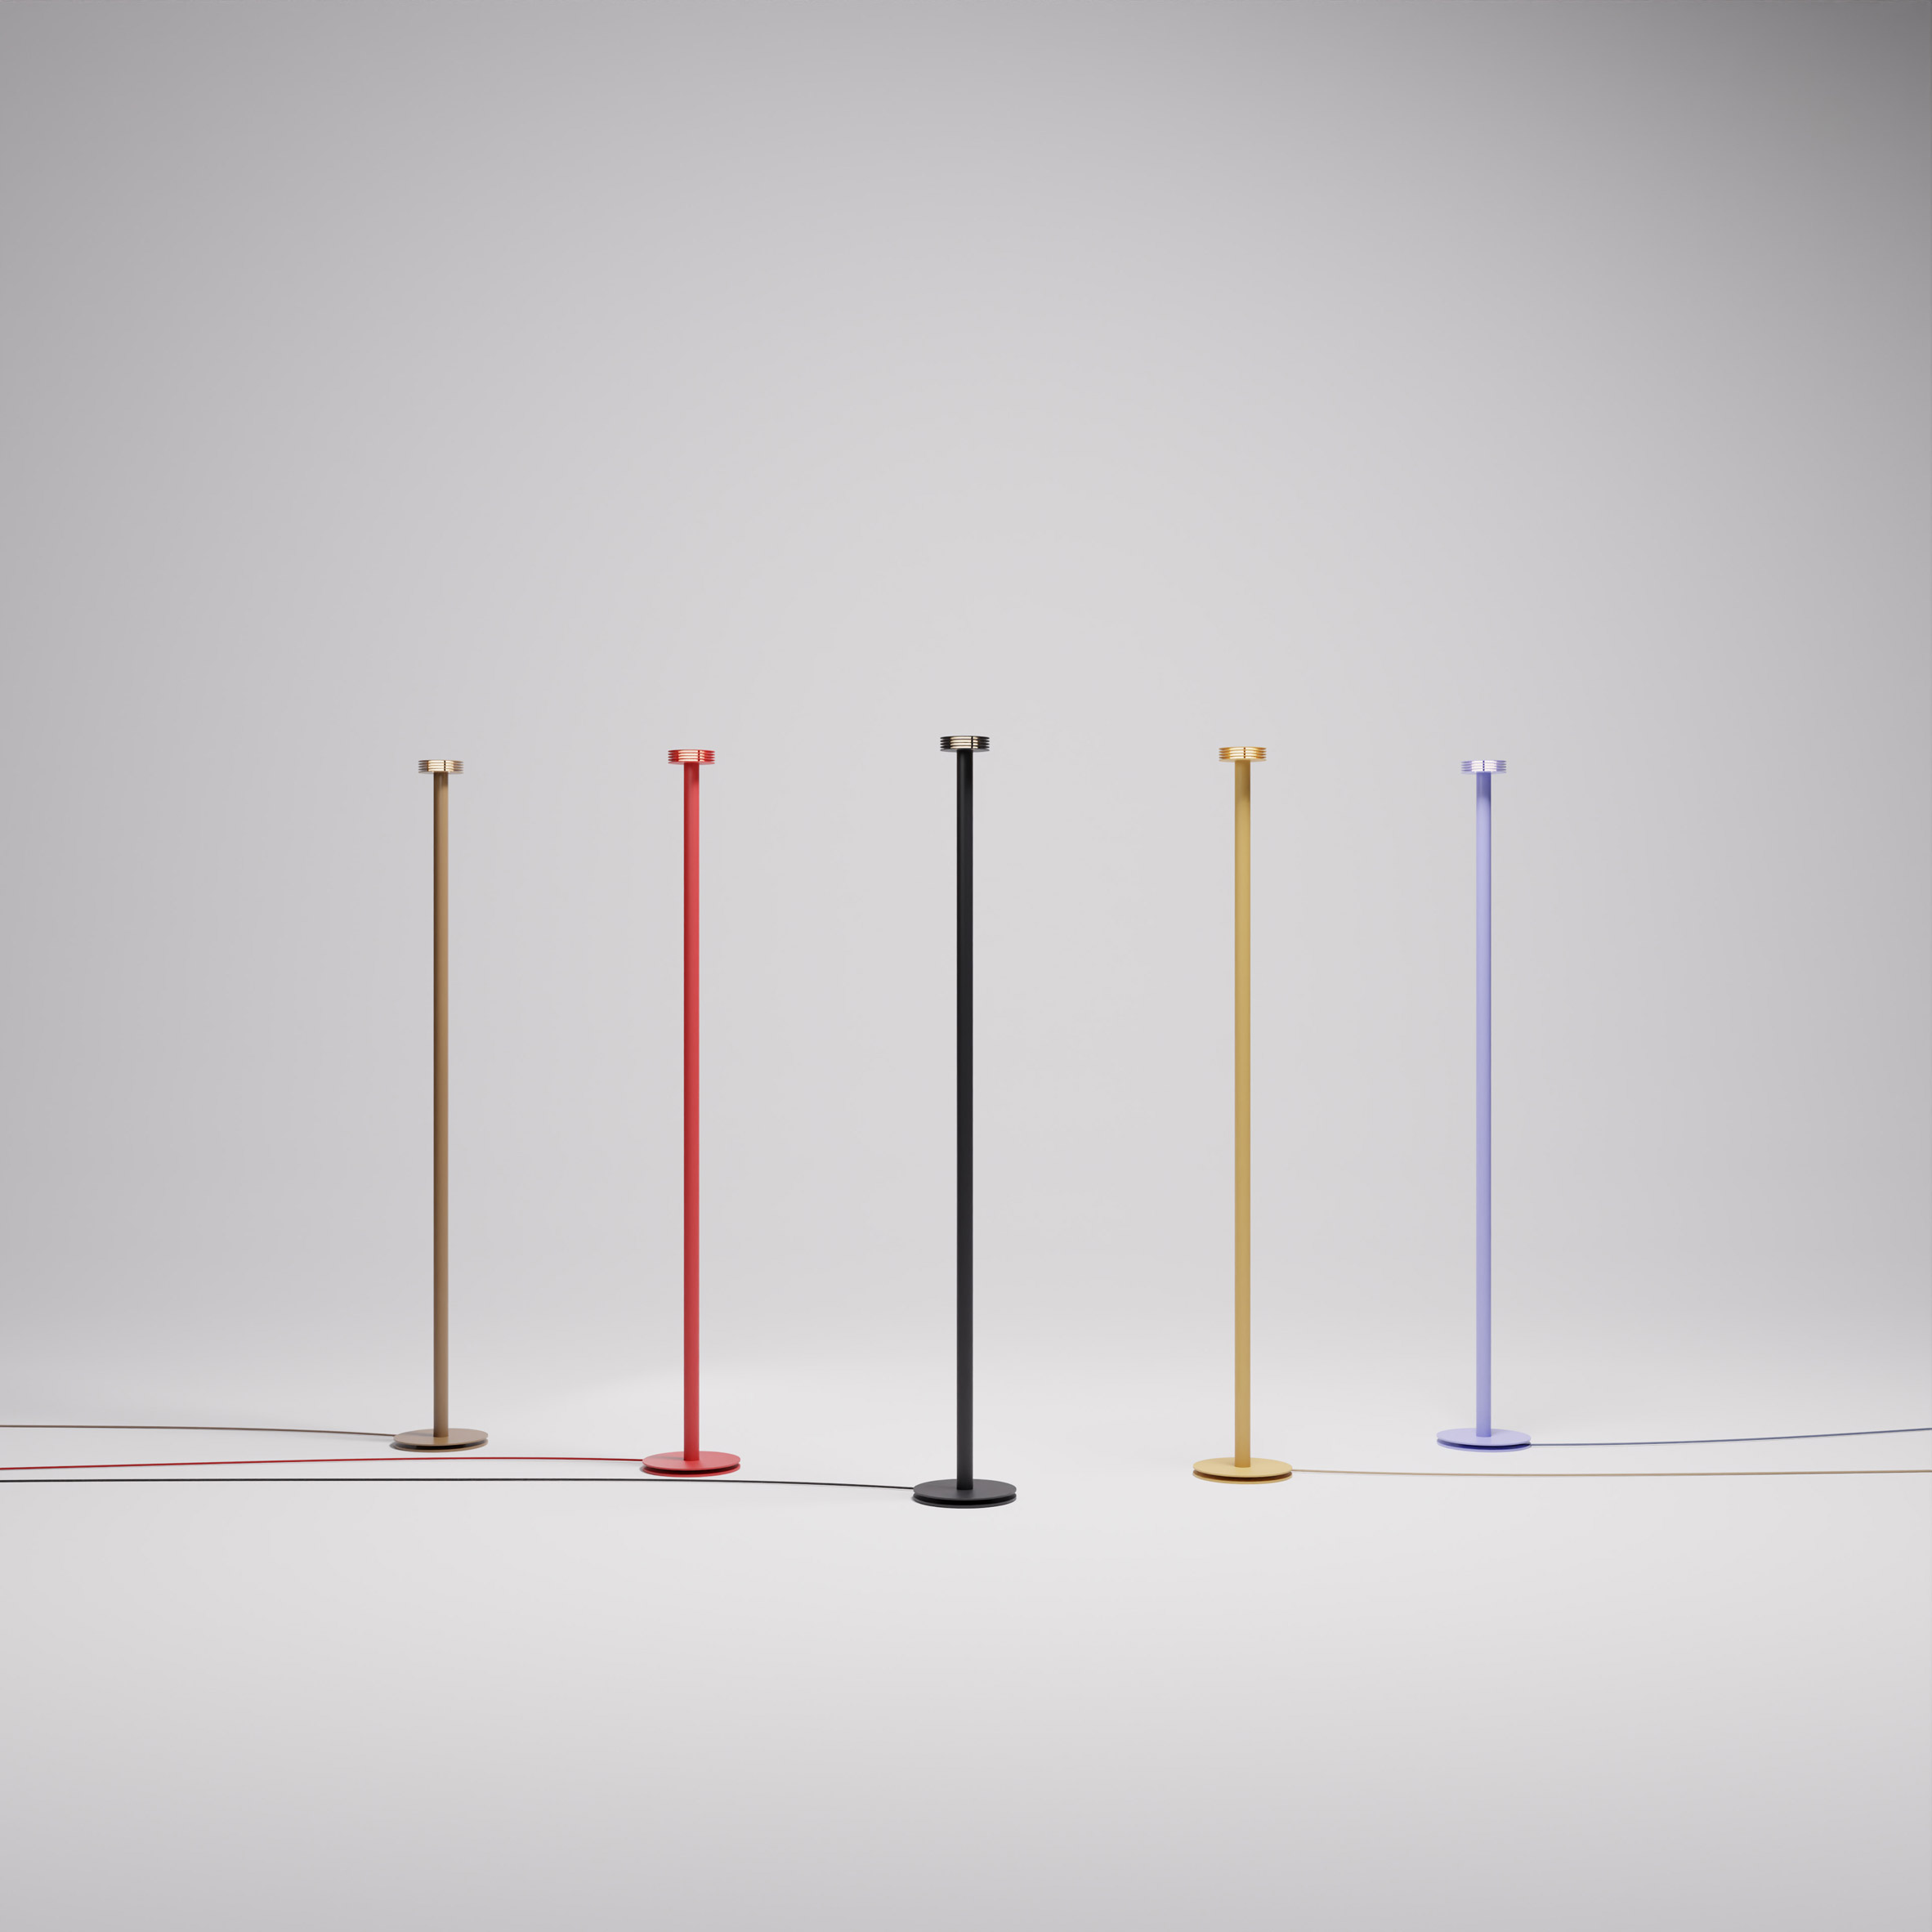 Multi-coloured floor lamps on grey backdrop